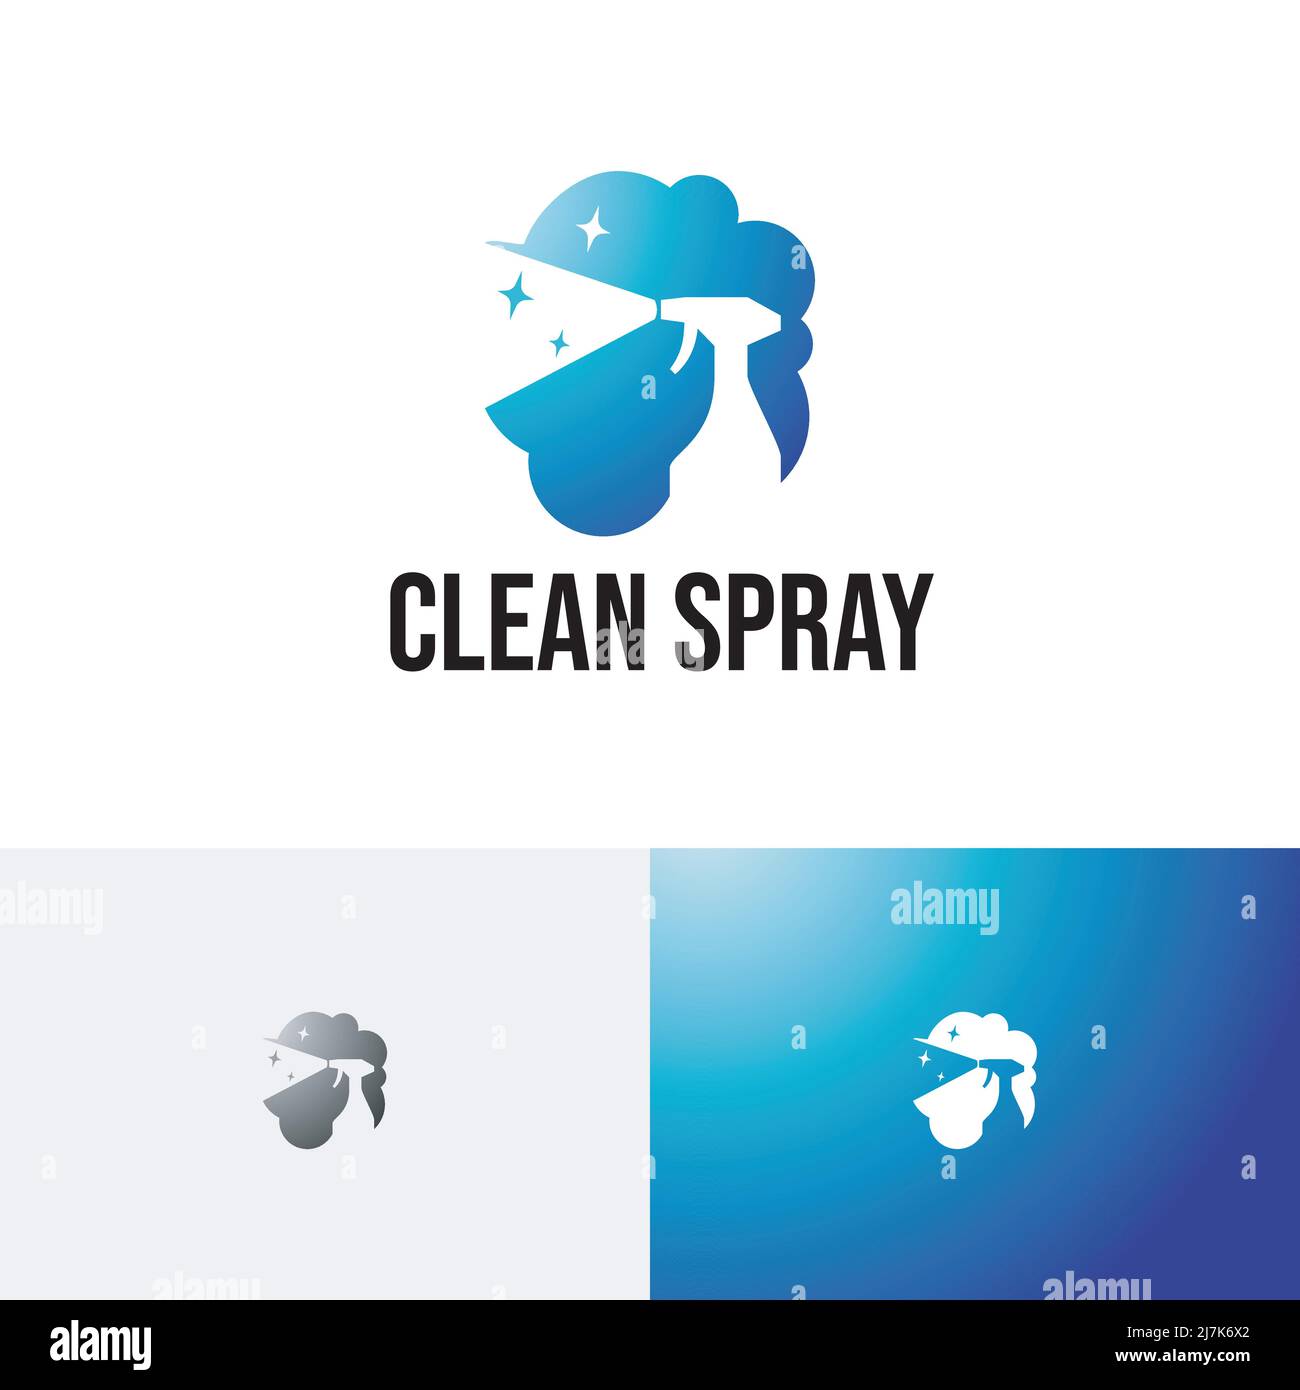 Clean Spray House Cleaning Service Negative Space Logo Stock Vector